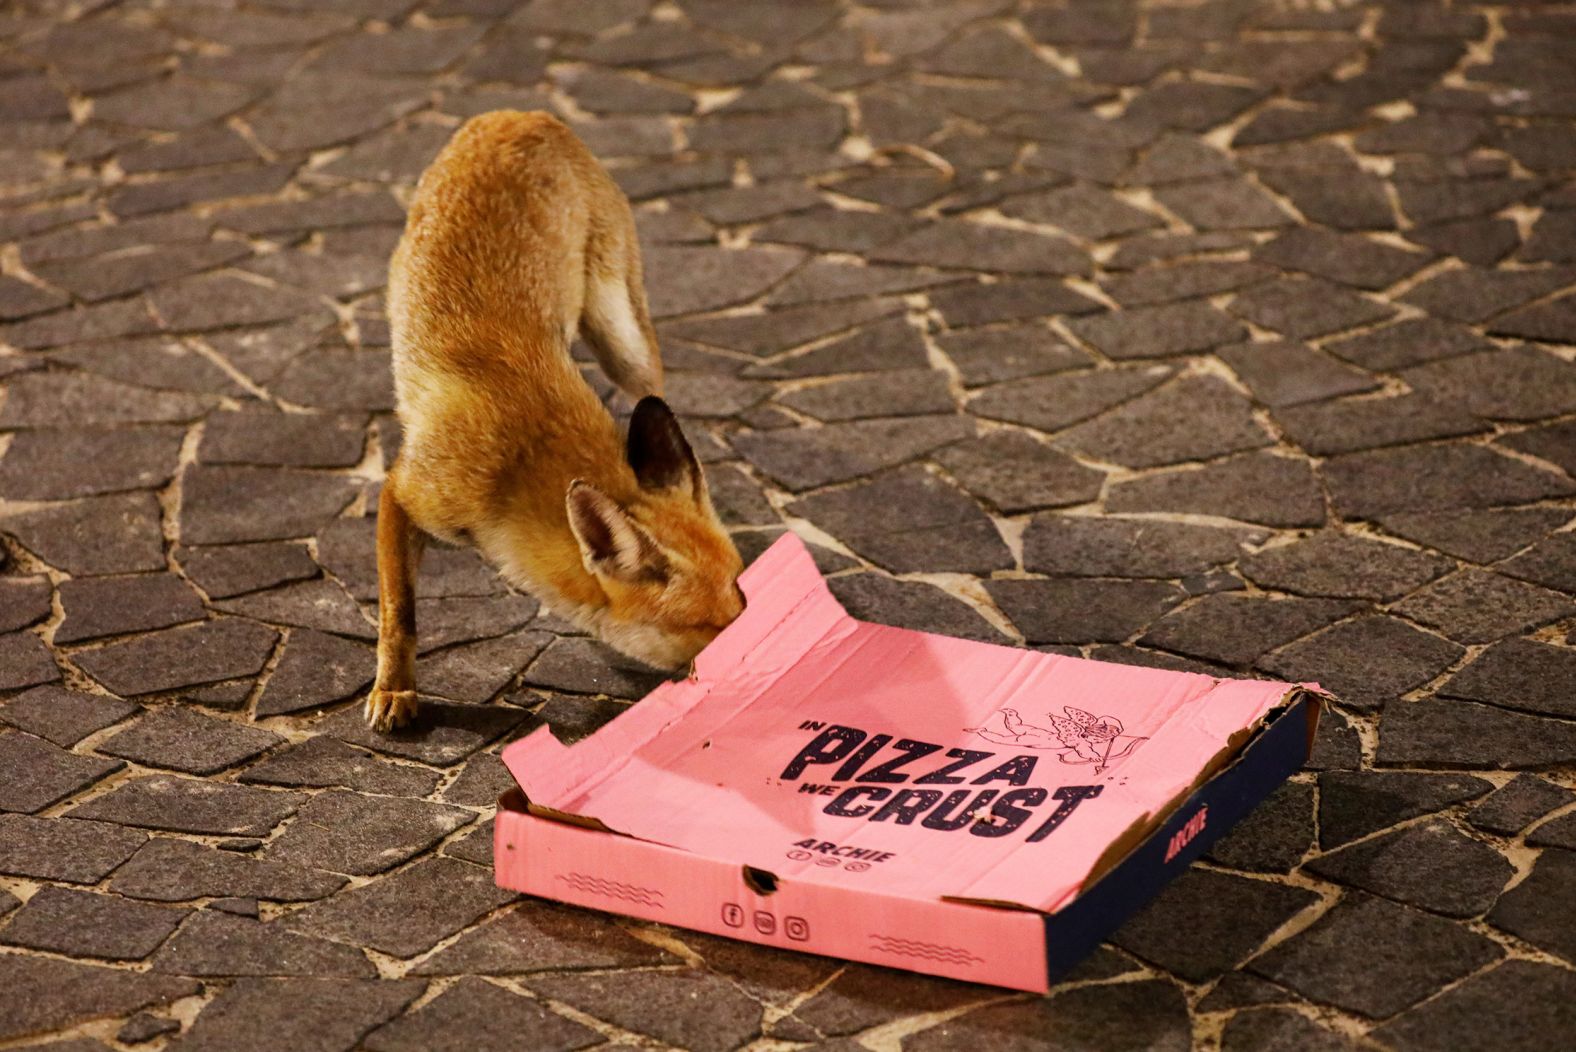 A red fox checks out a pizza box on a promenade in Ashkelon, Israel, on April 17. A family of foxes has become a regular feature in the city, <a href="index.php?page=&url=https%3A%2F%2Fwww.reuters.com%2Farticle%2Fus-health-coronavirus-israel-foxes%2Femboldened-by-closures-foxes-prowl-an-ancient-port-city-in-israel-idUSKCN2241RL" target="_blank" target="_blank">Reuters reported,</a> coming out of the desert to explore empty streets.